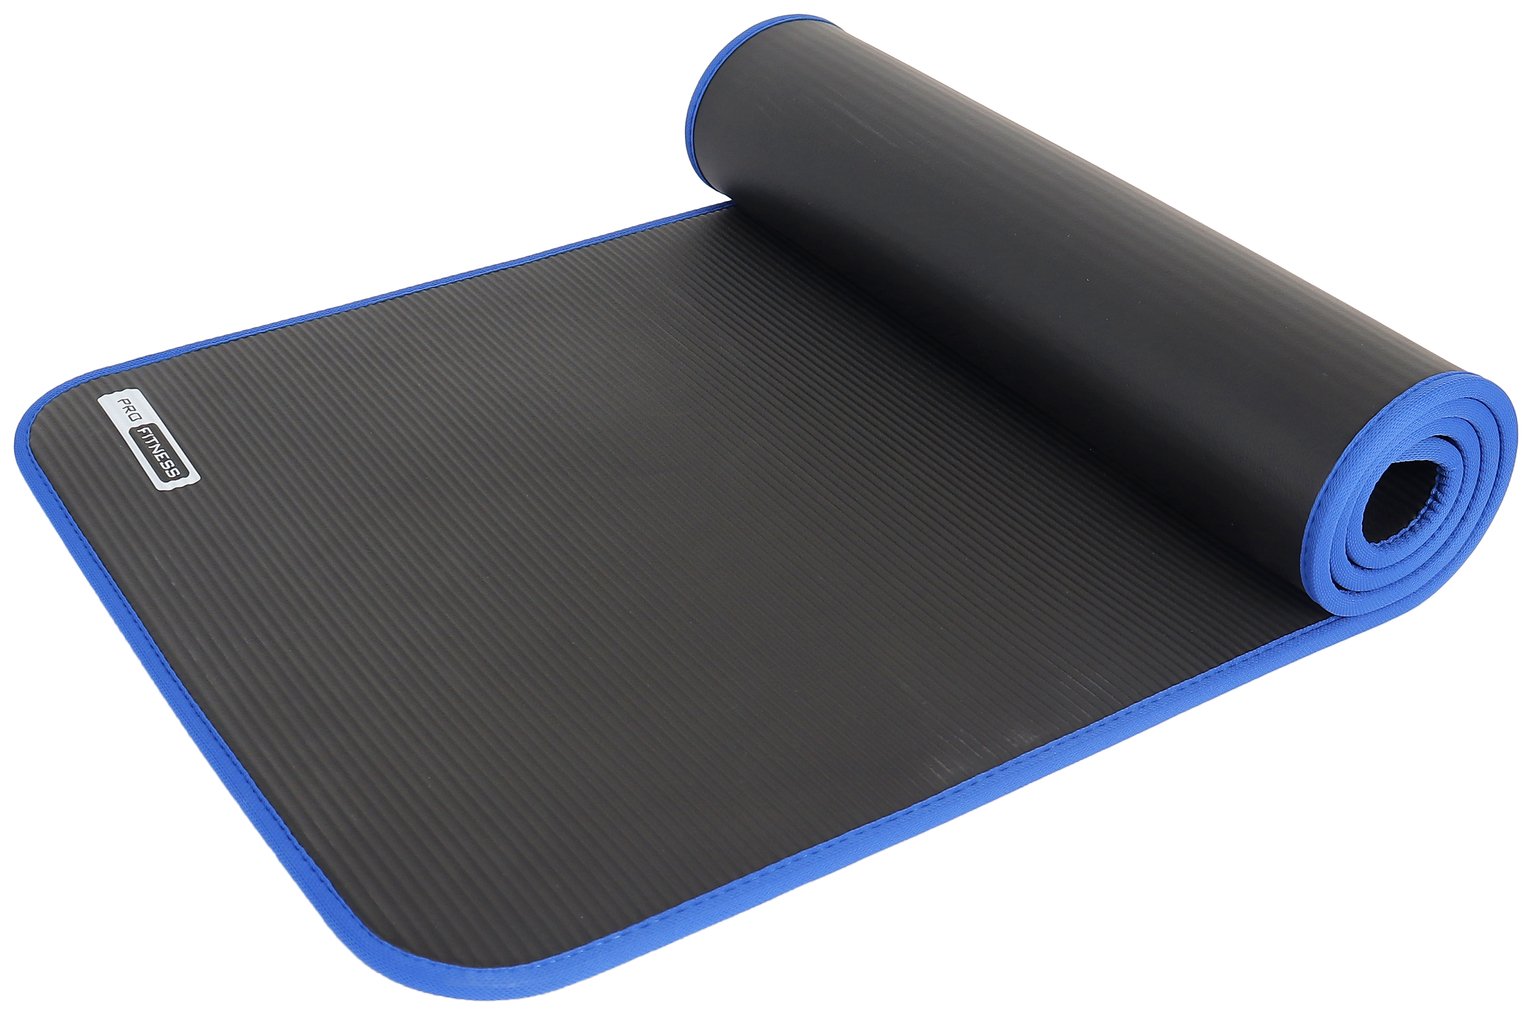 Pro Fitness 10mm Thickness Yoga Exercise Mat – Black